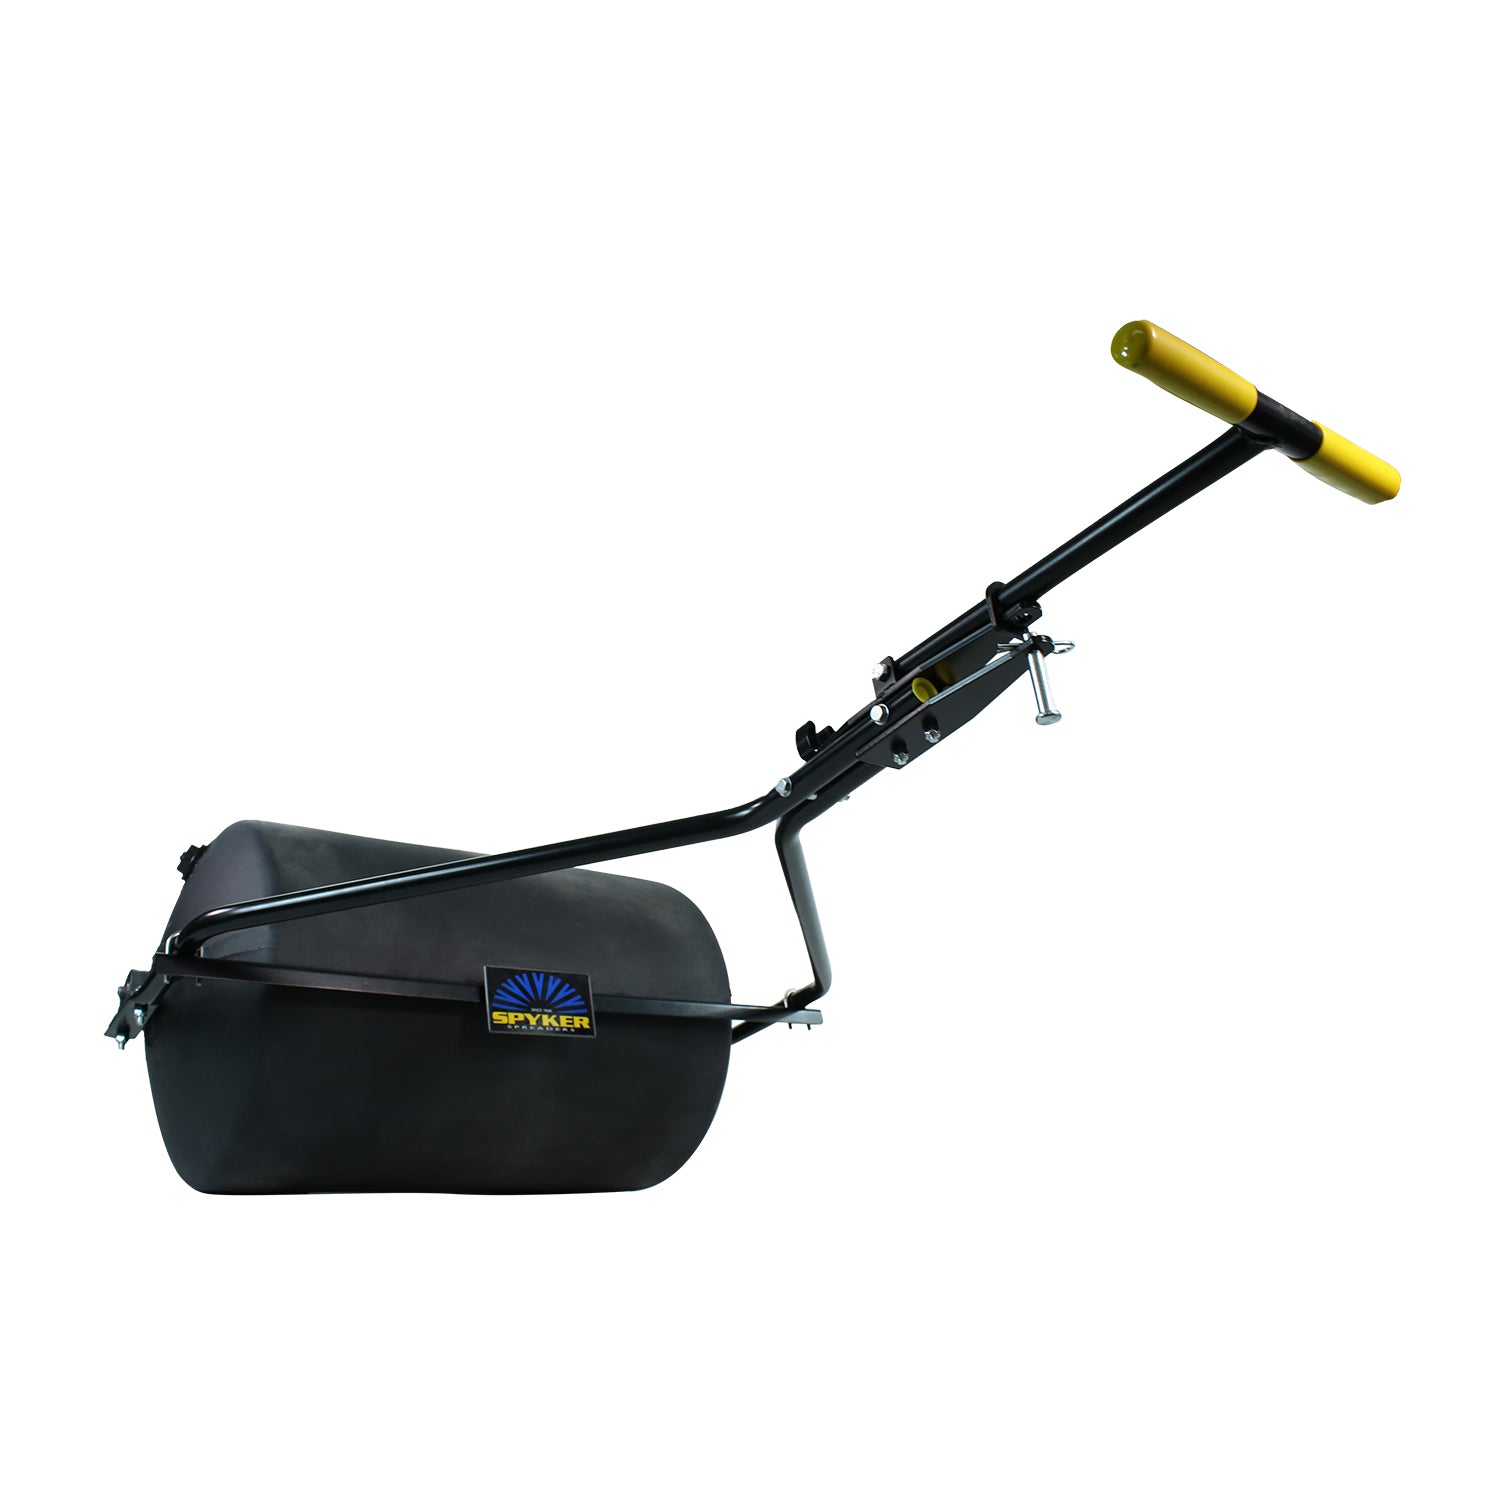 R28-1824 300# COMMERCIAL PUSH/TOW LAWN ROLLER, 18" x 24"